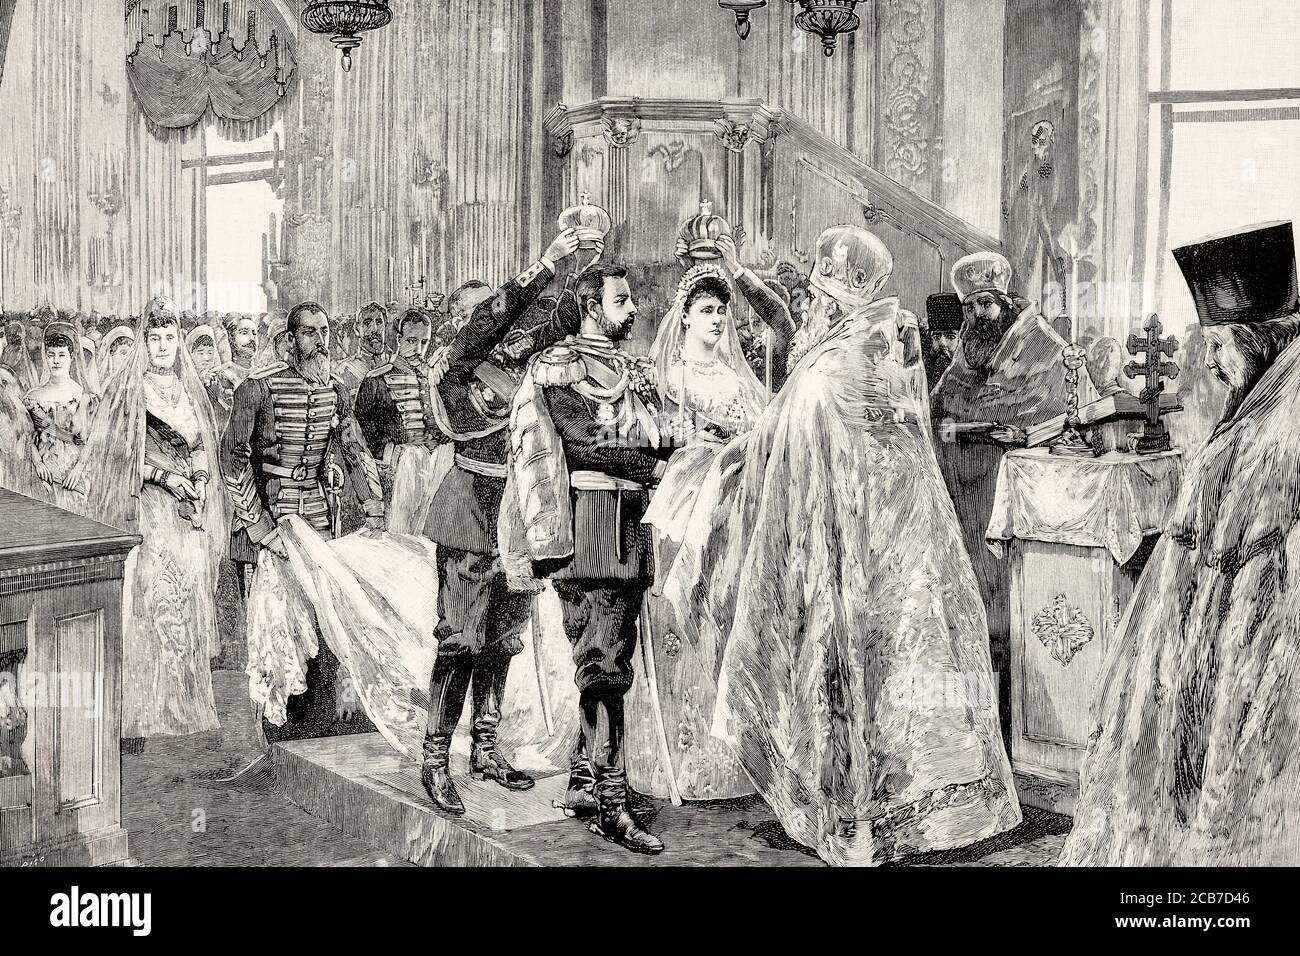 Coronation of Tsar Nicholas II and the Princess Alix of Hesse-Darmstadt at the Cathedral of the Assumption of Moscow on November 26, 1894. Russia. Old XIX century engraved illustration from La Ilustracion Española y Americana 1894 Stock Photo